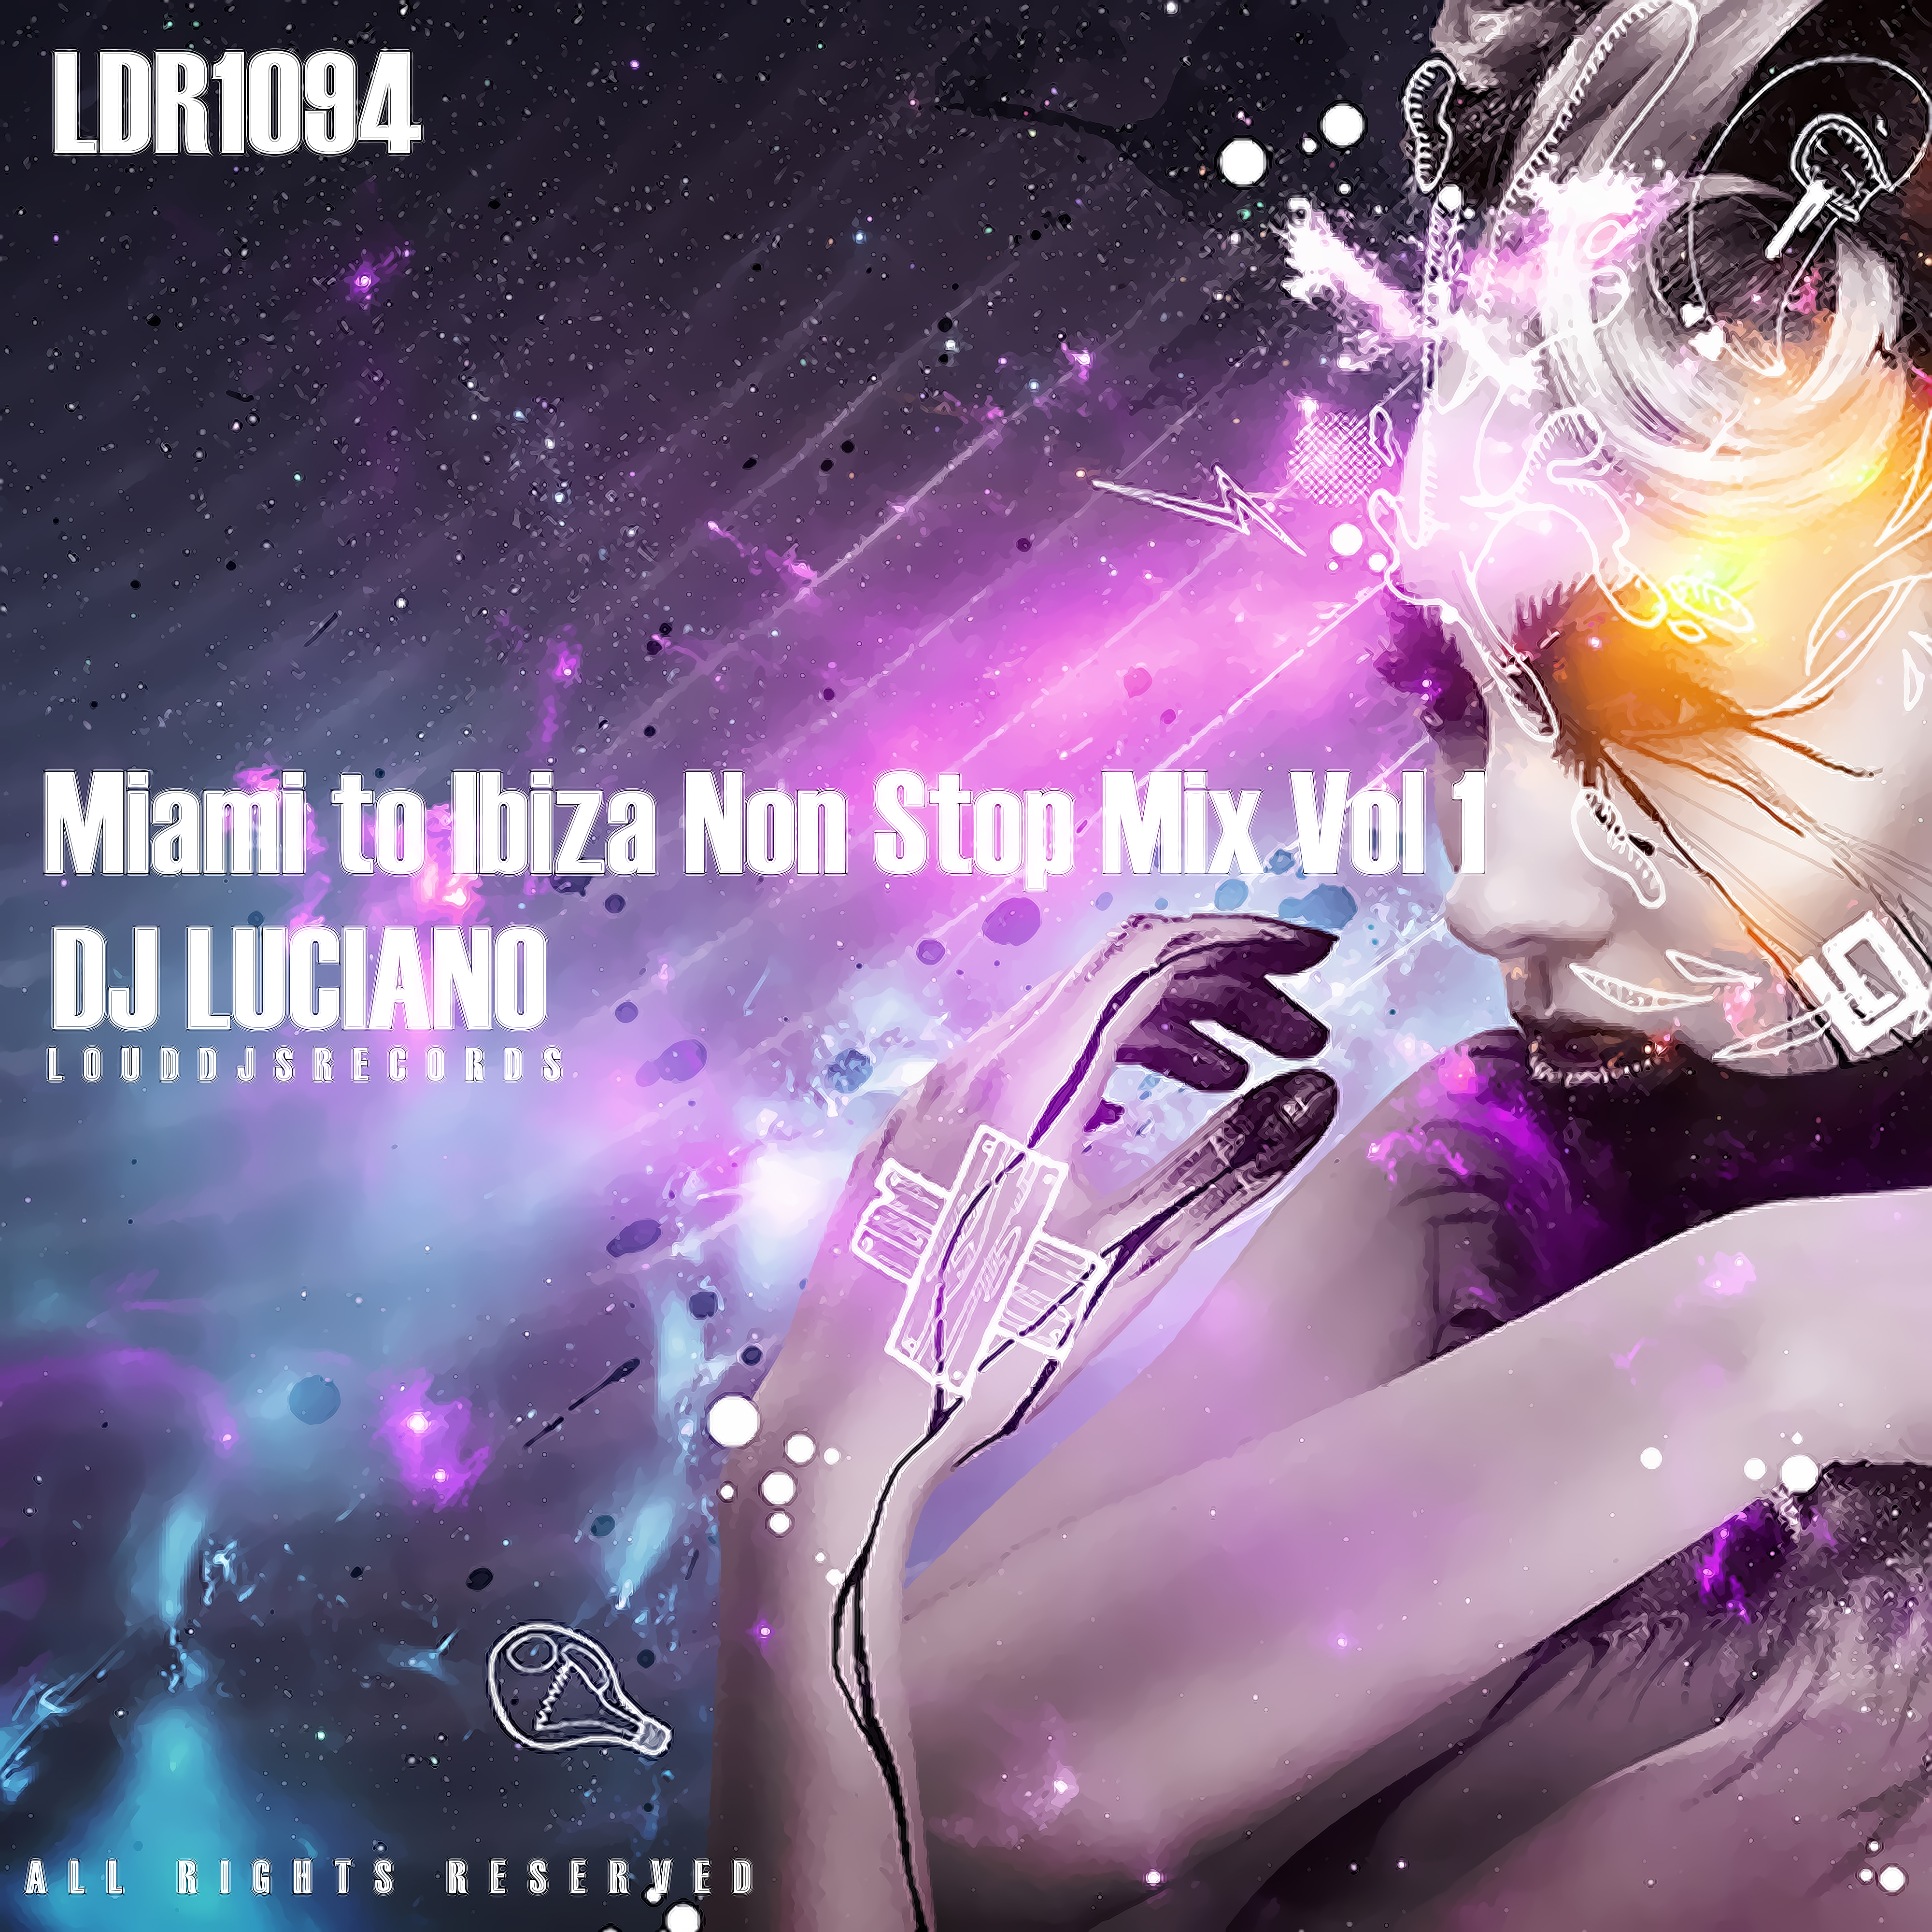 Miami to Ibiza Non Stop Mix, Vol. 1 (Mixed by DJ Luciano) [Continuous Mix]